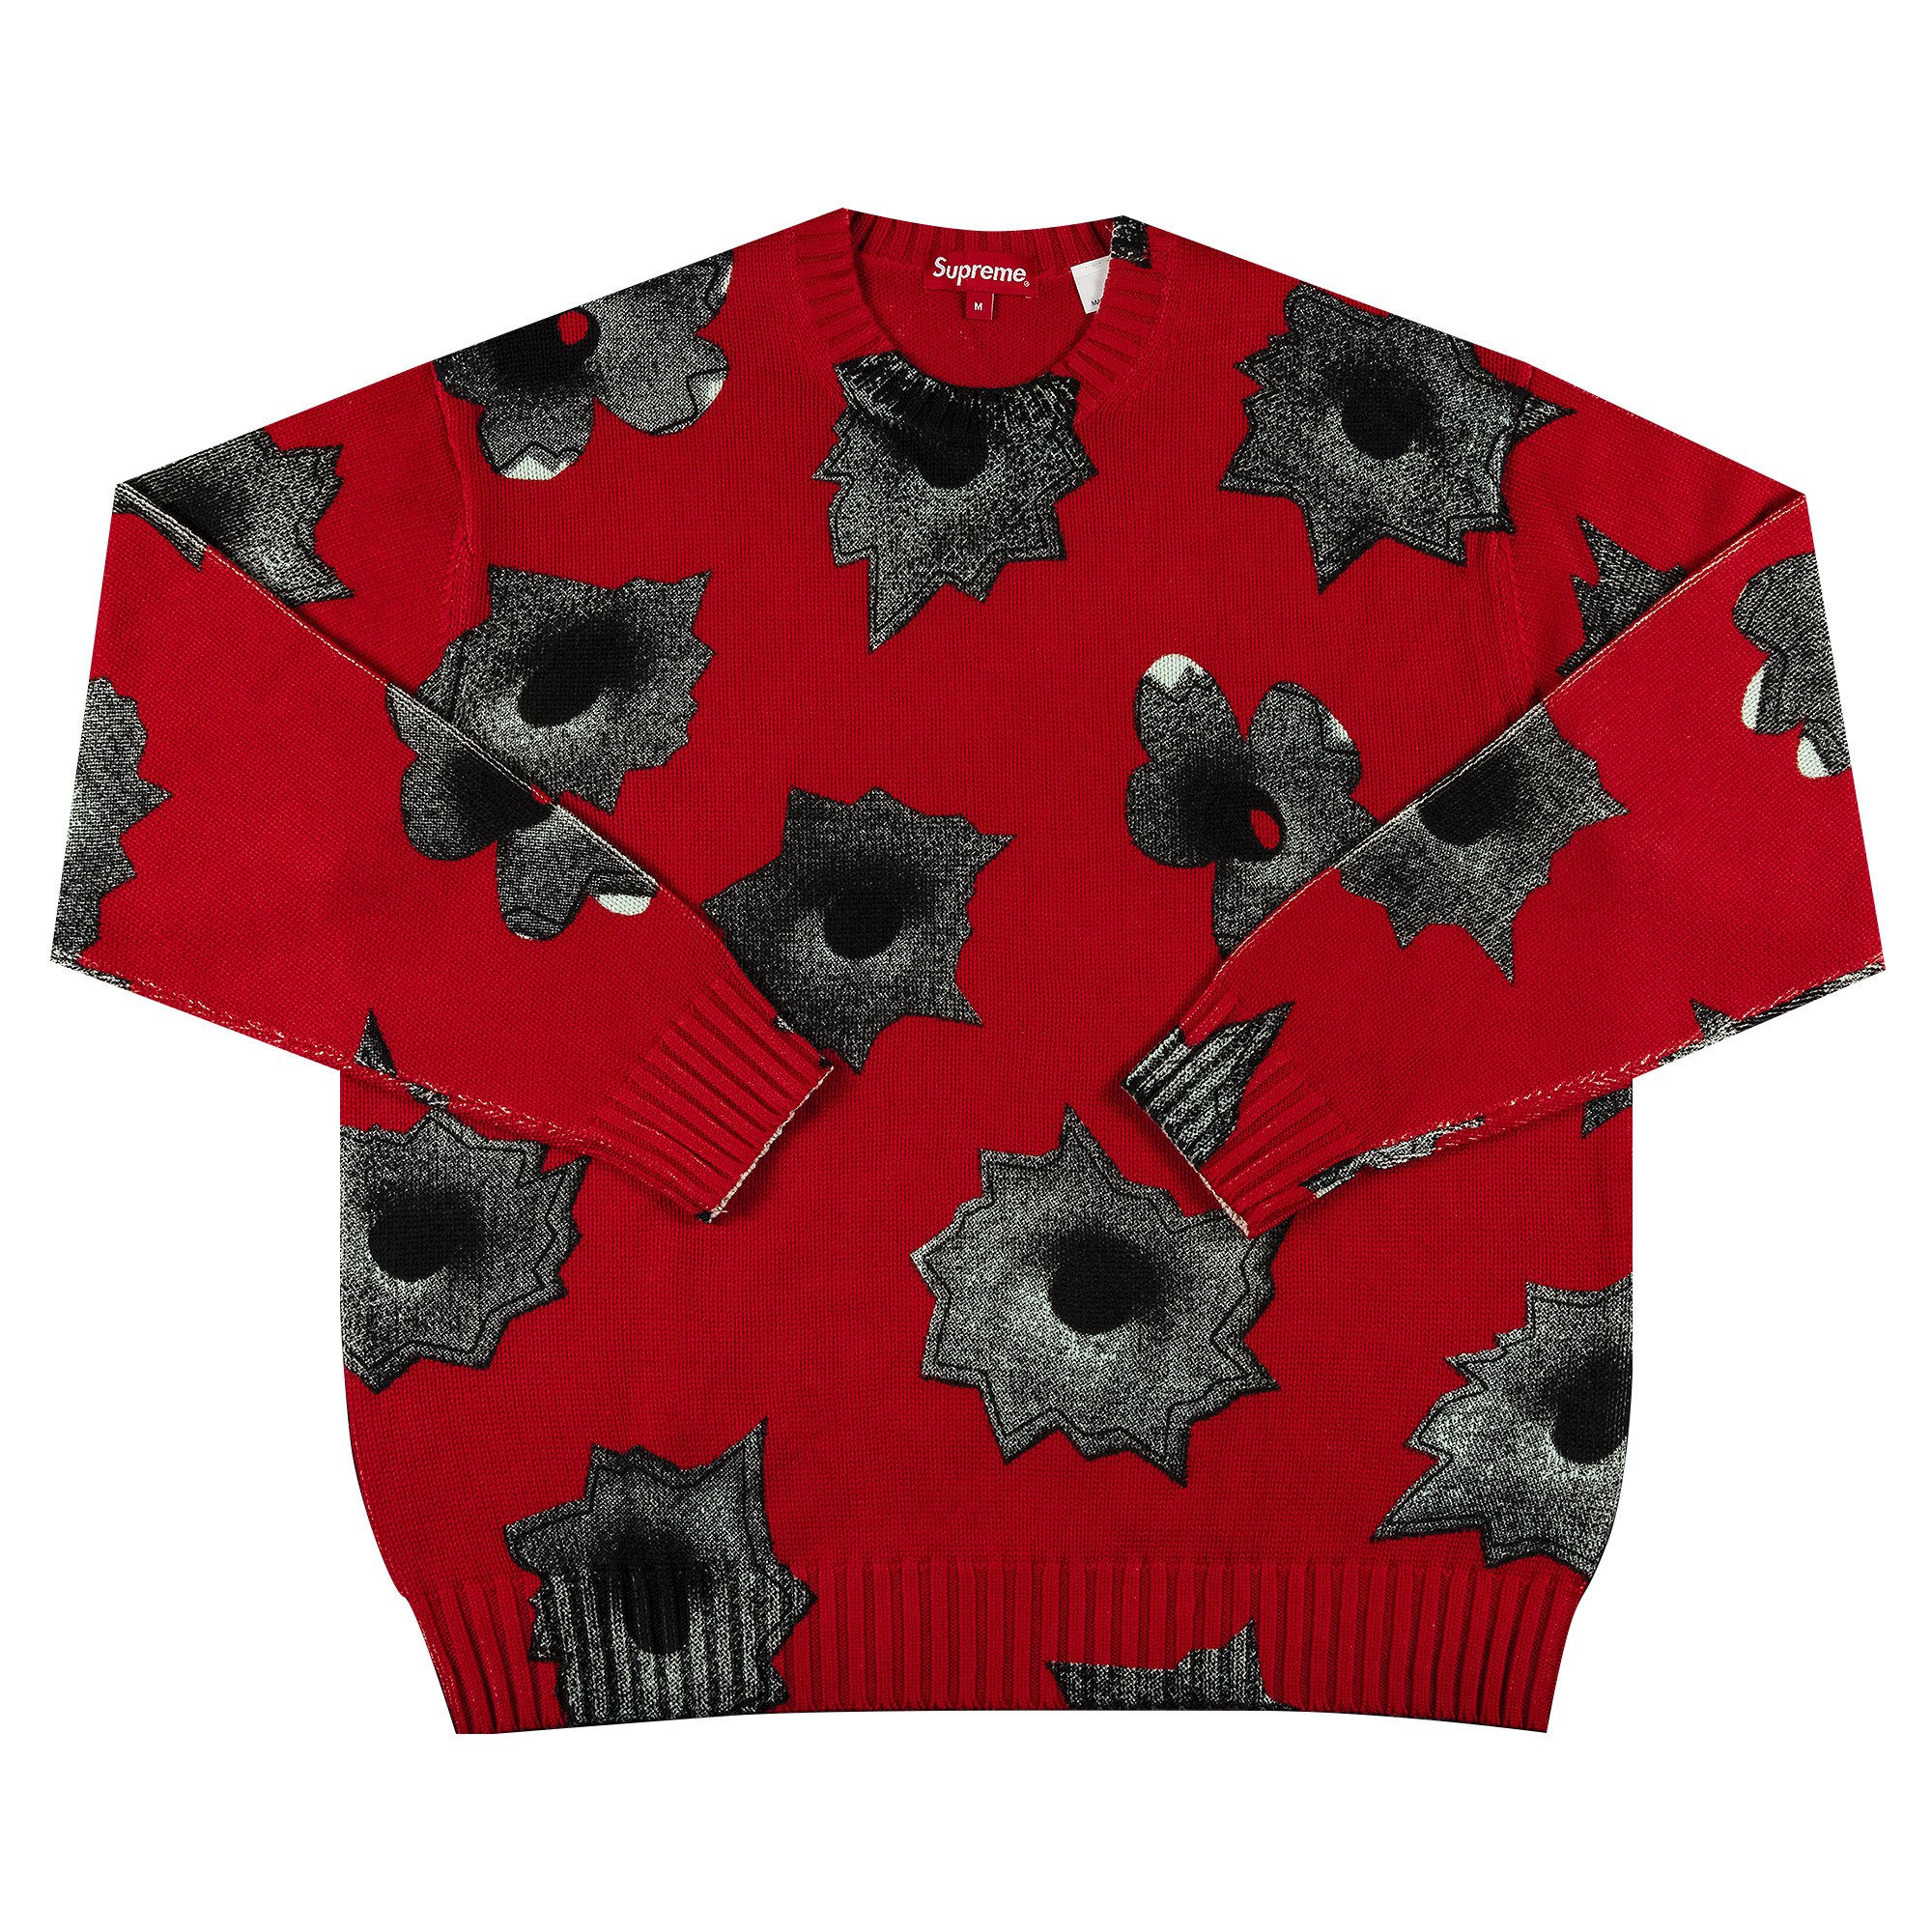 Buy Supreme x Nate Lowman Sweater 'Red' - SS22SK14 RED - Red | GOAT